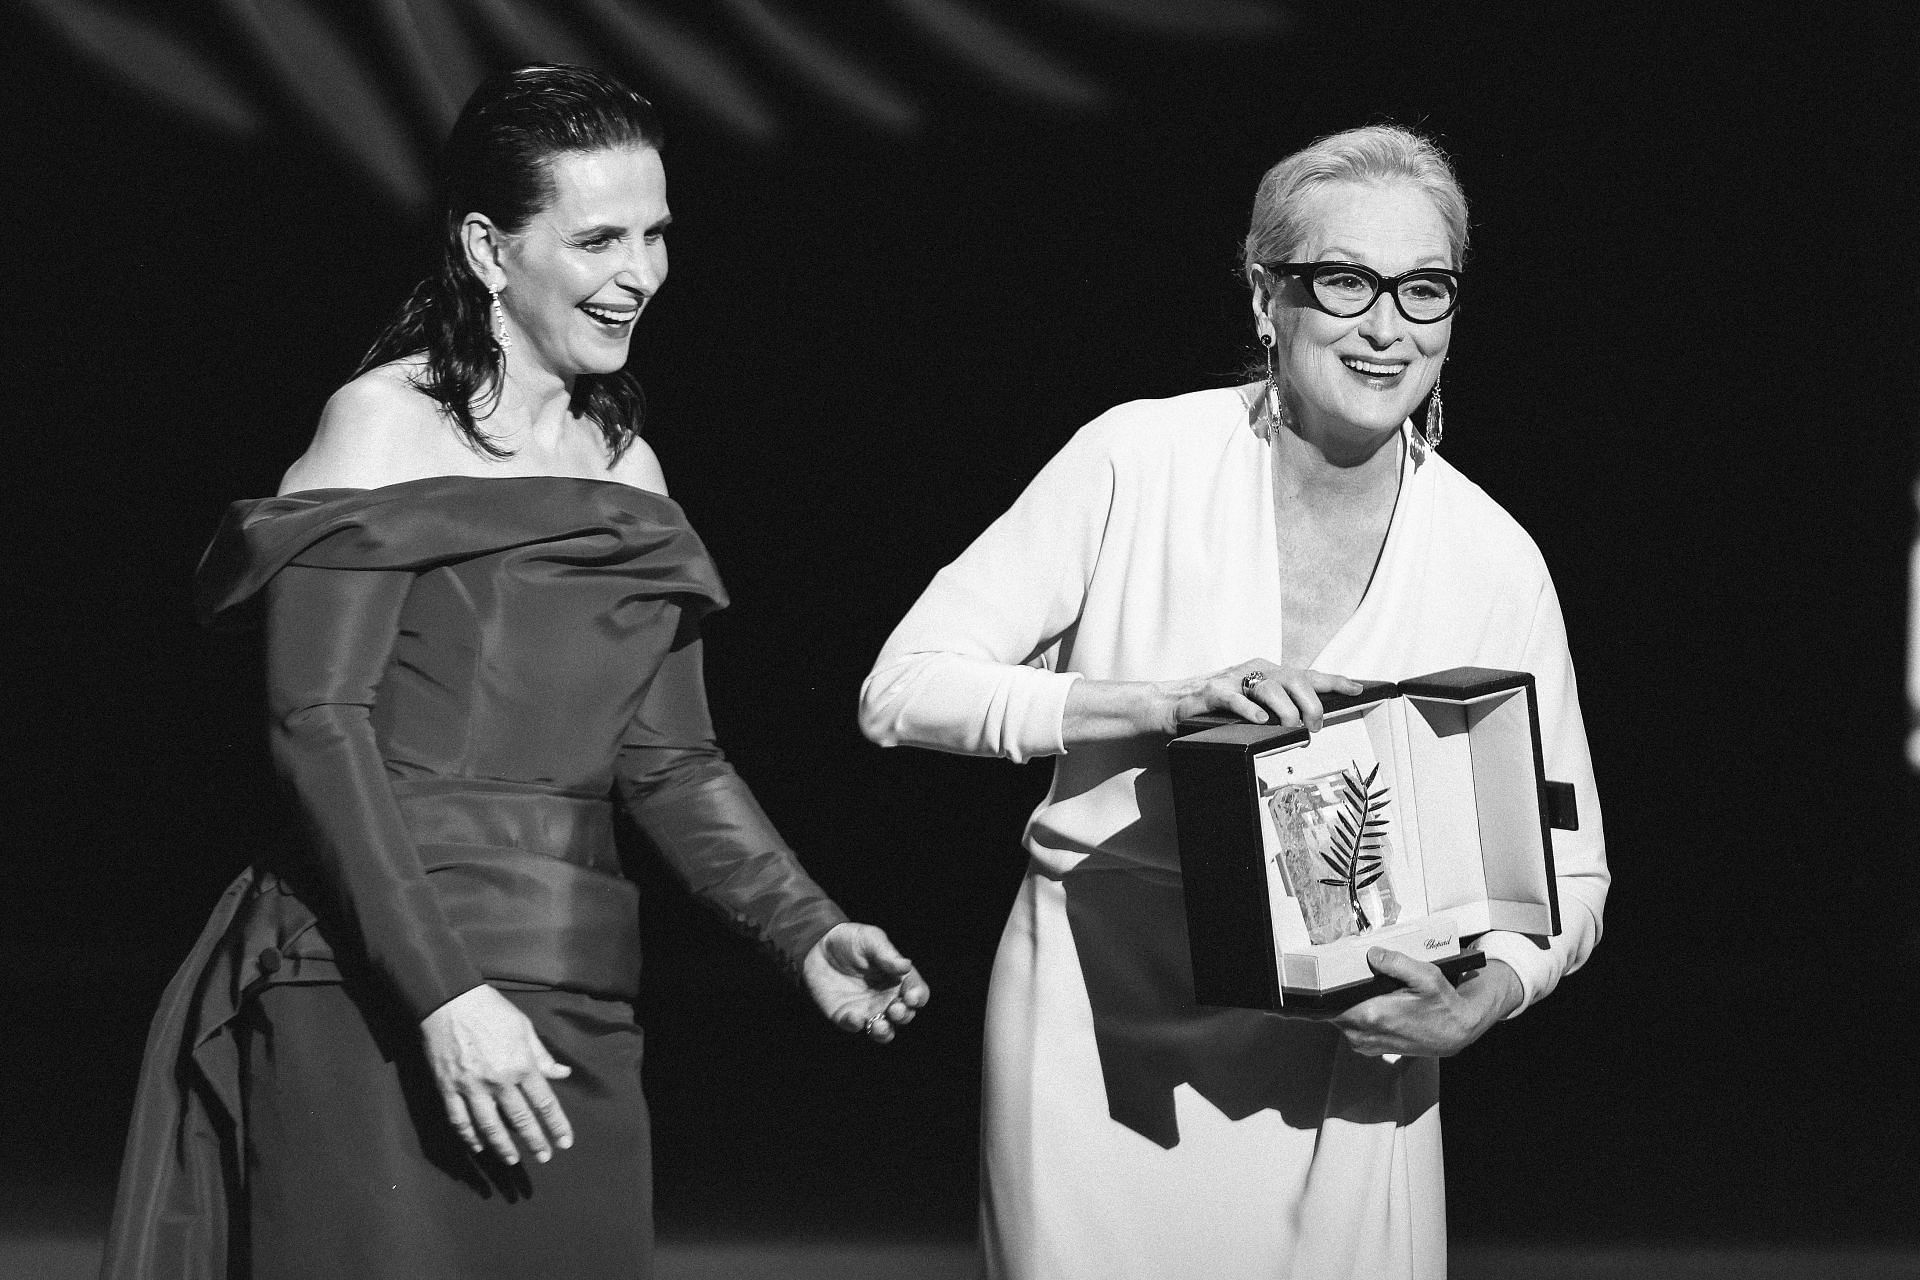 Meryl Streep (R) receives the Honorary Palme D&rsquo;Or Award from Juliette Binoche (L) on stage during the opening ceremony at the 77th annual Cannes Film Festival (Image via Getty)